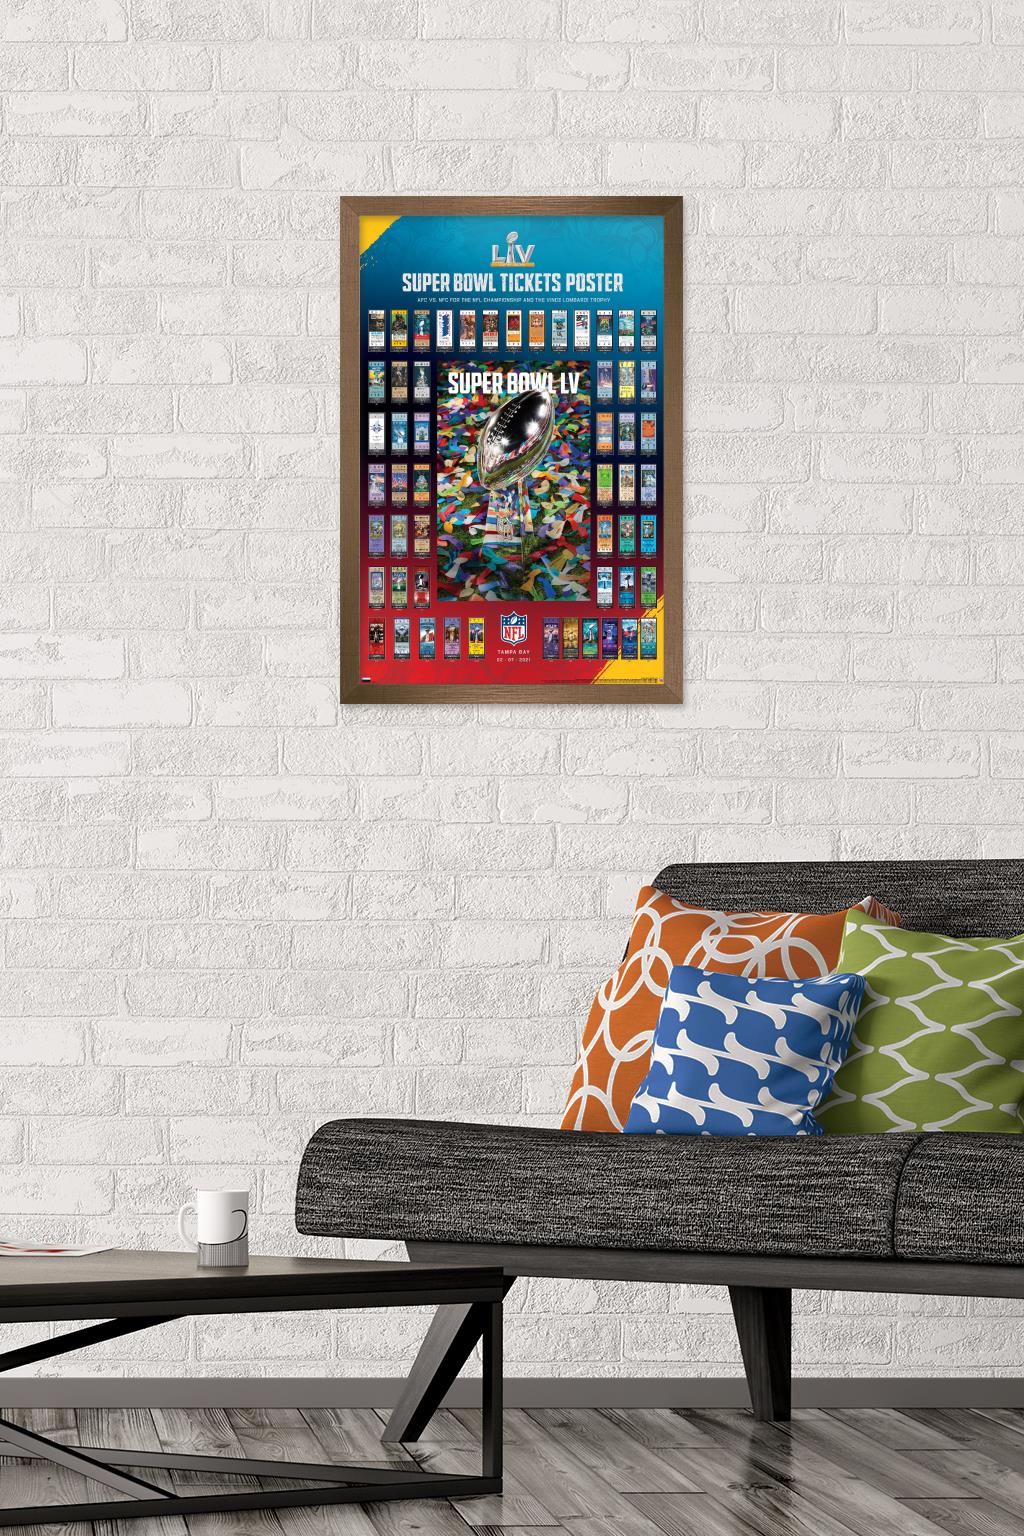 Trends International NFL League - Super Bowl LV - Tickets Wall Poster 16.5" x 24.25" x .75" Bronze Framed Version - image 2 of 5